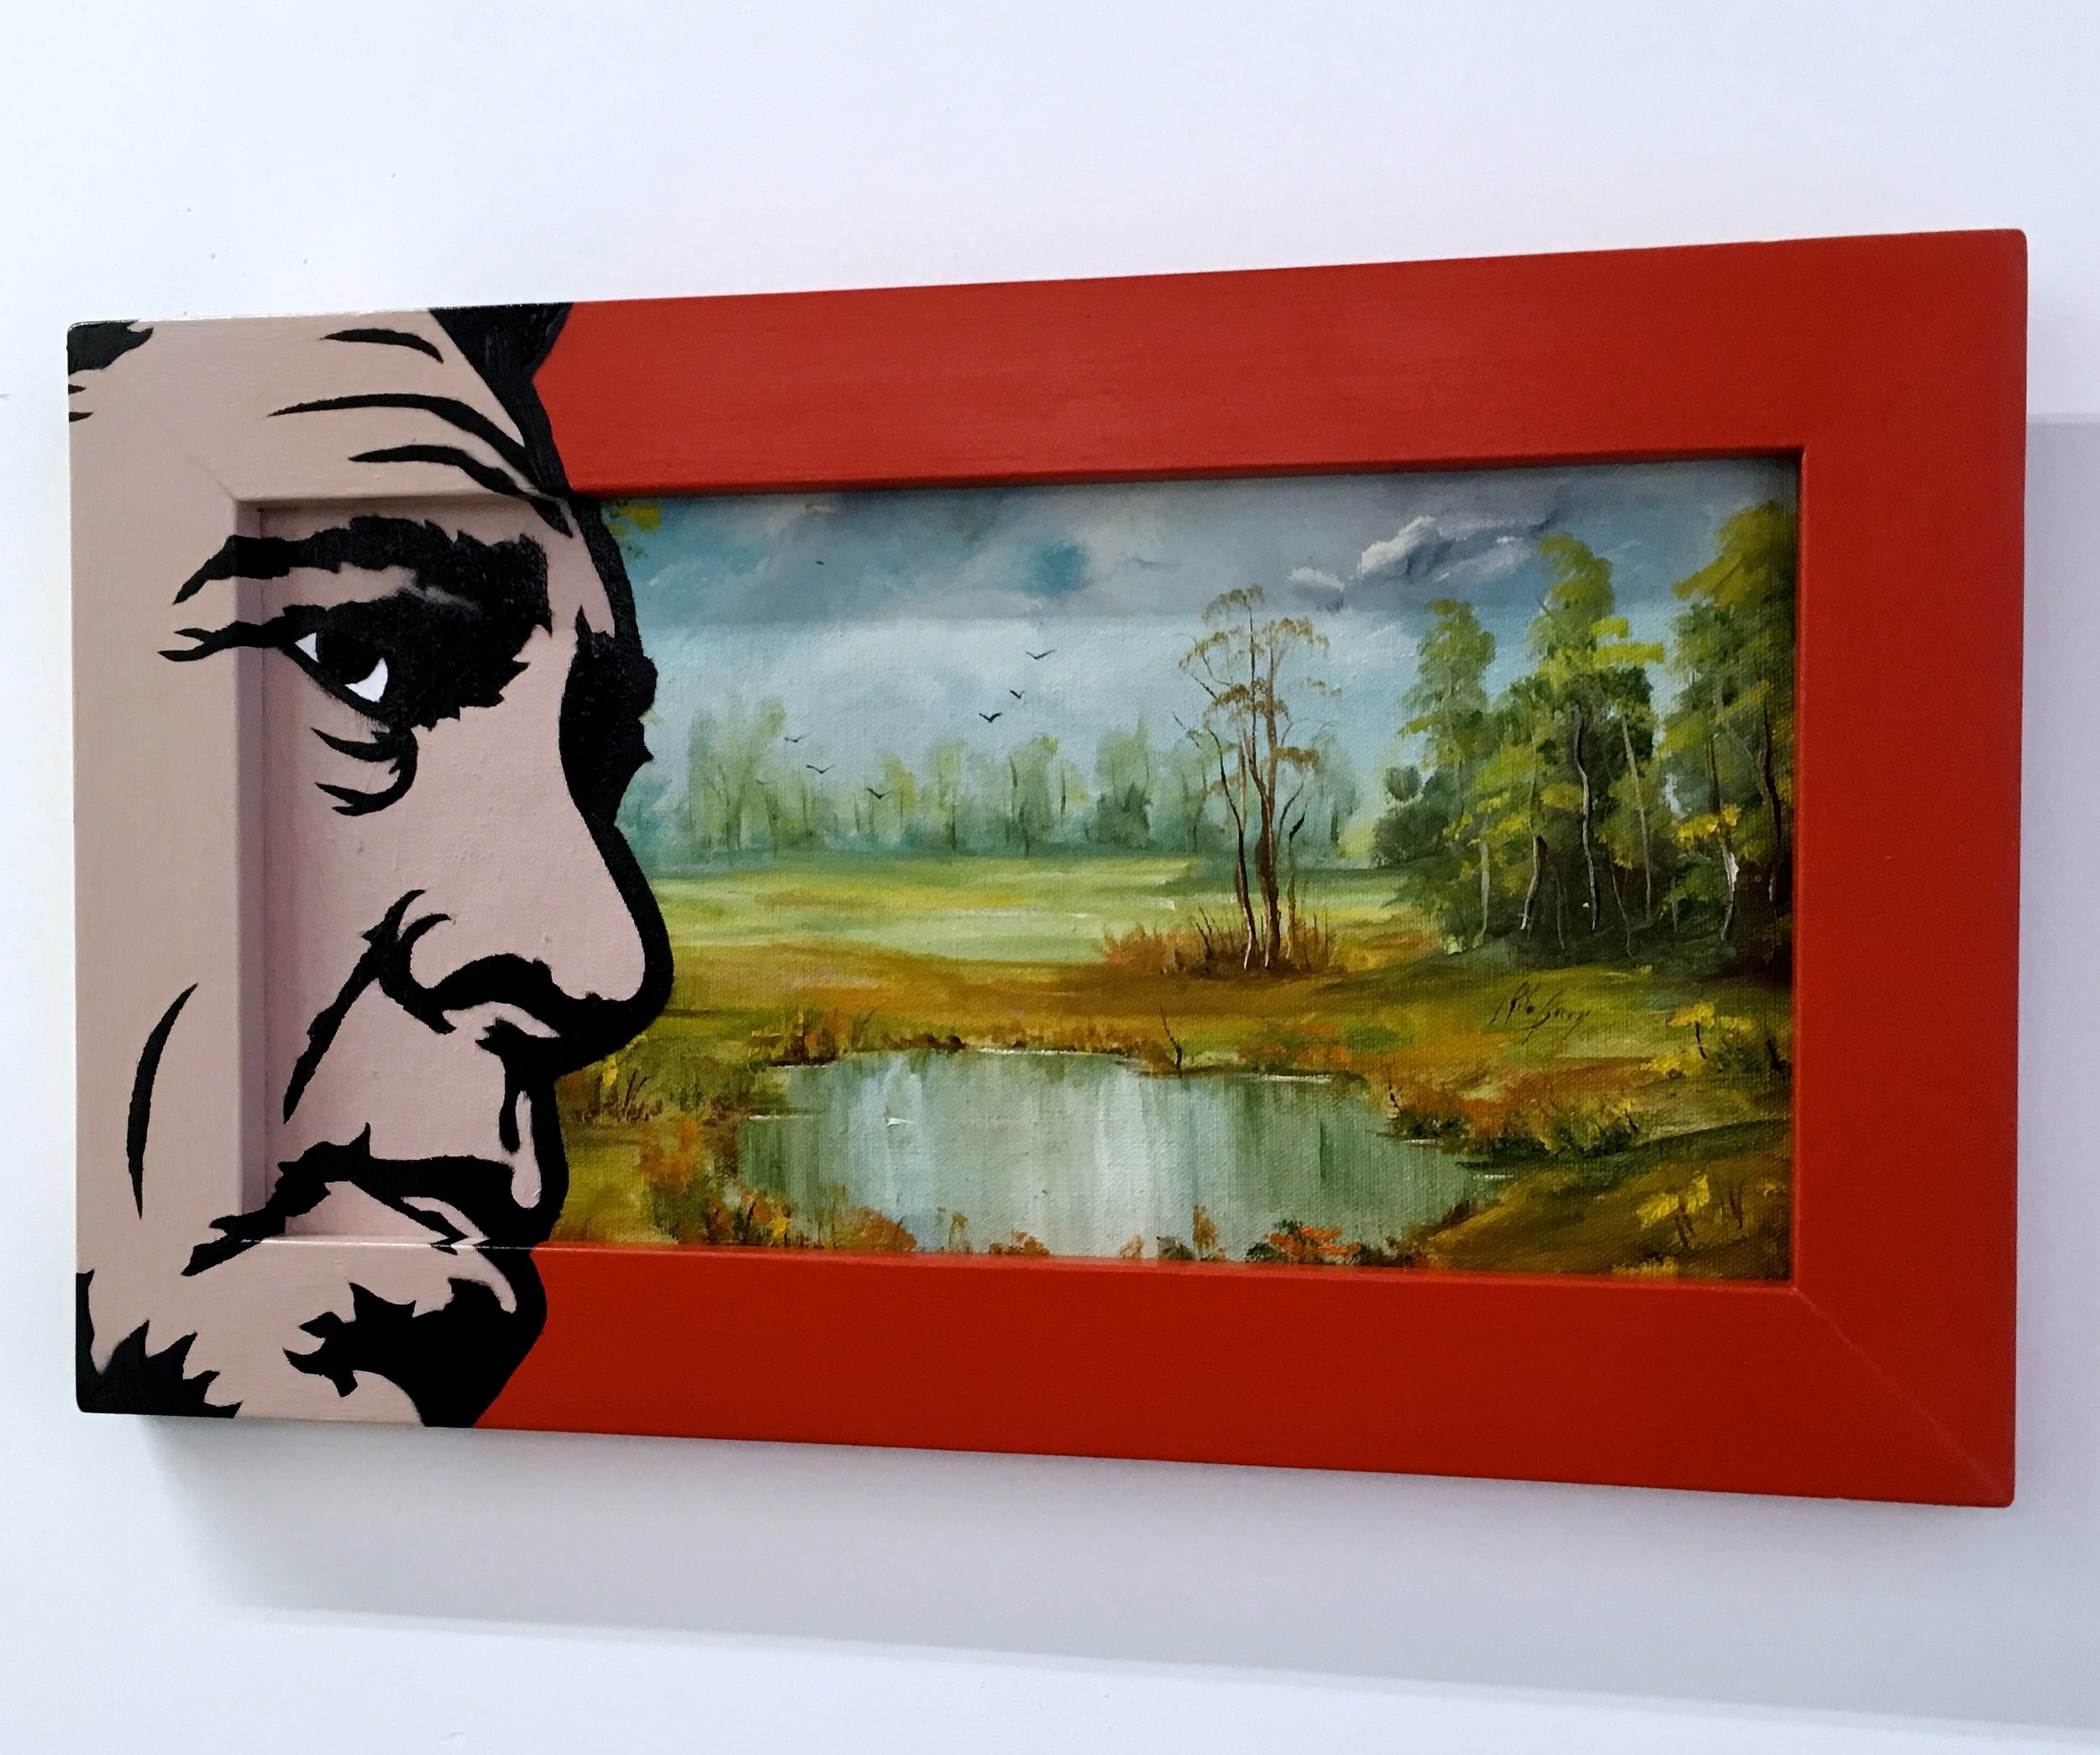 "At war with nature" Acrylic & spray paint on found/vintage painting/frame.